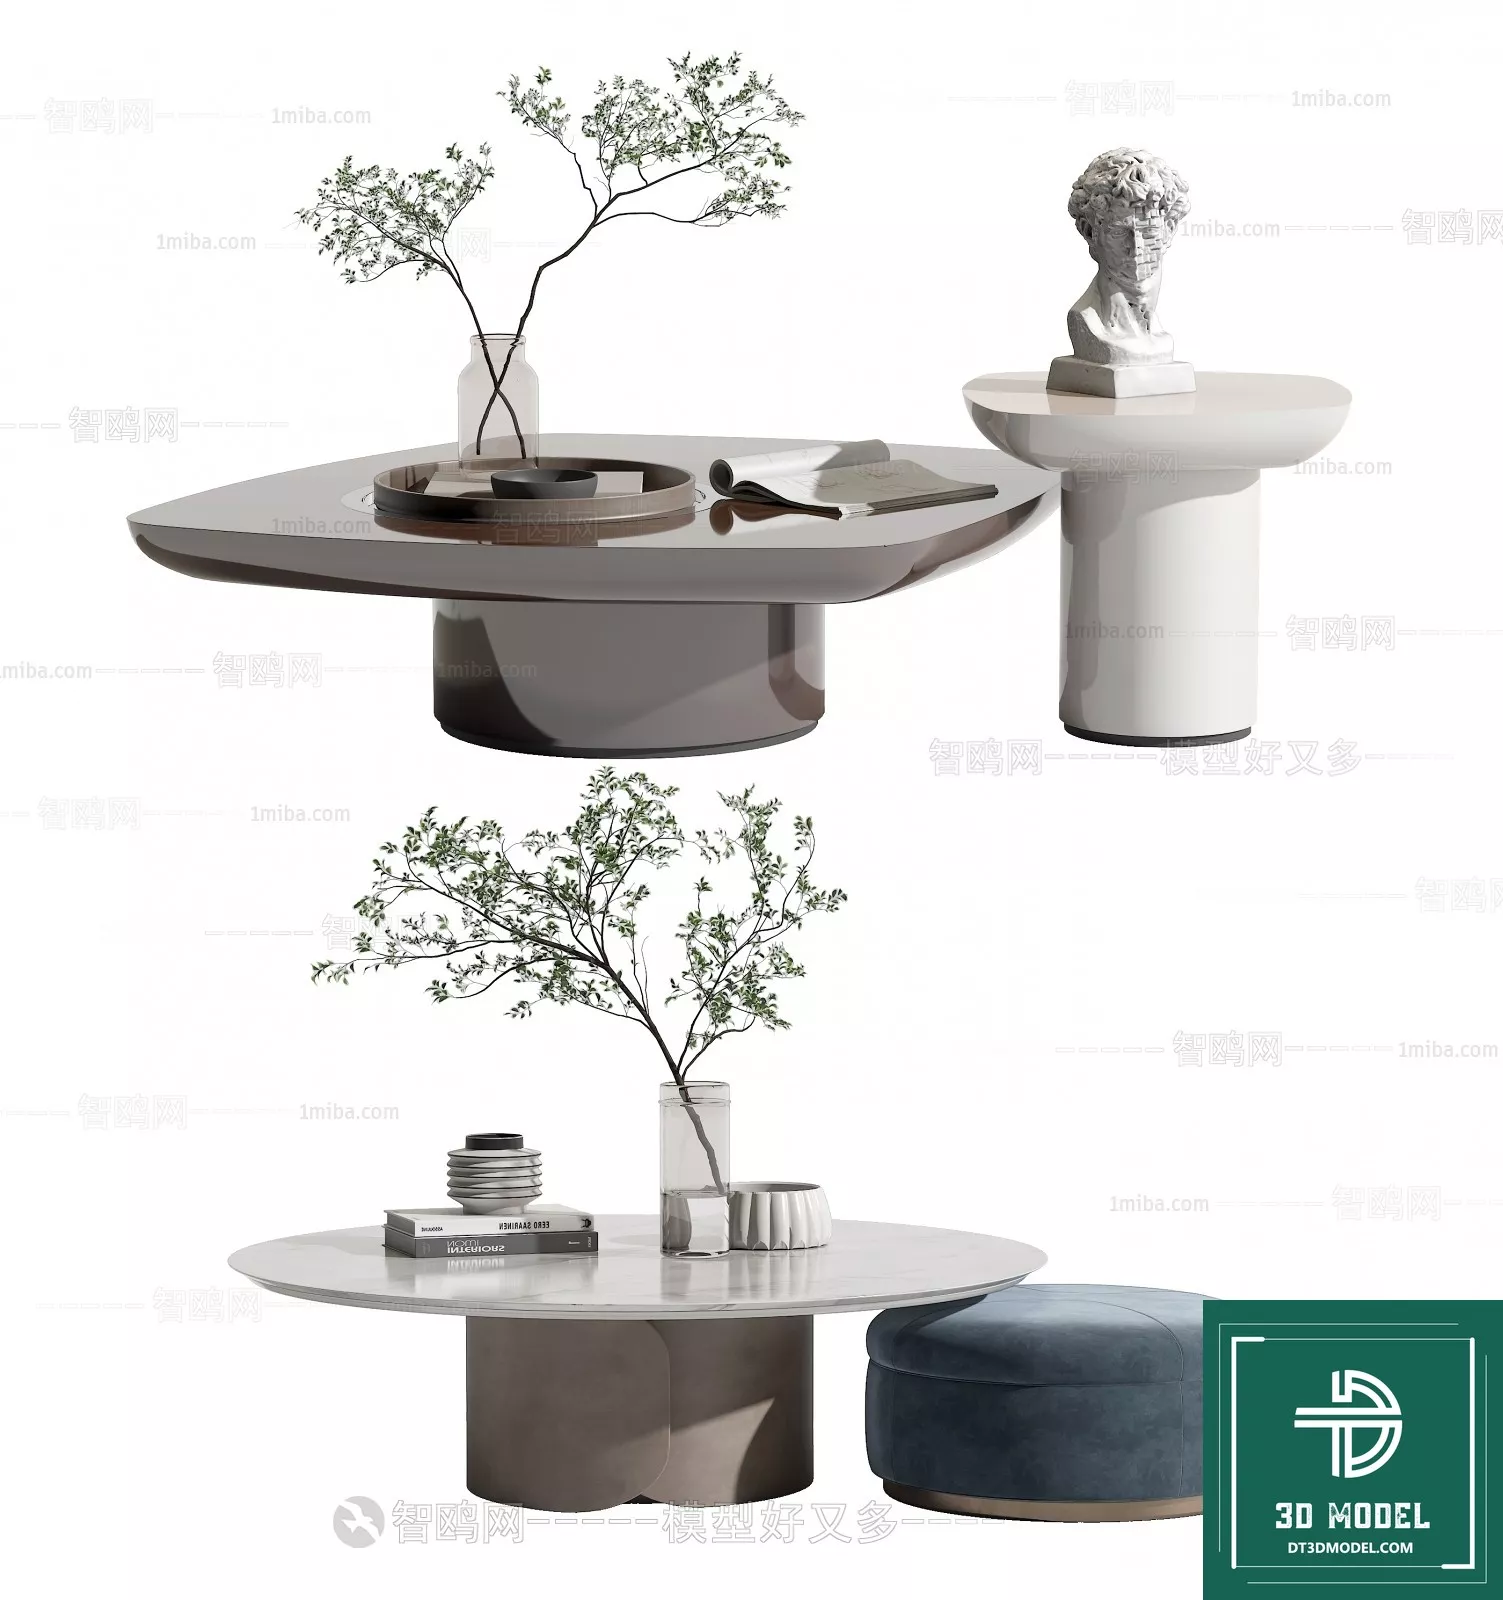 MODERN TEA TABLE - SKETCHUP 3D MODEL - VRAY OR ENSCAPE - ID14986